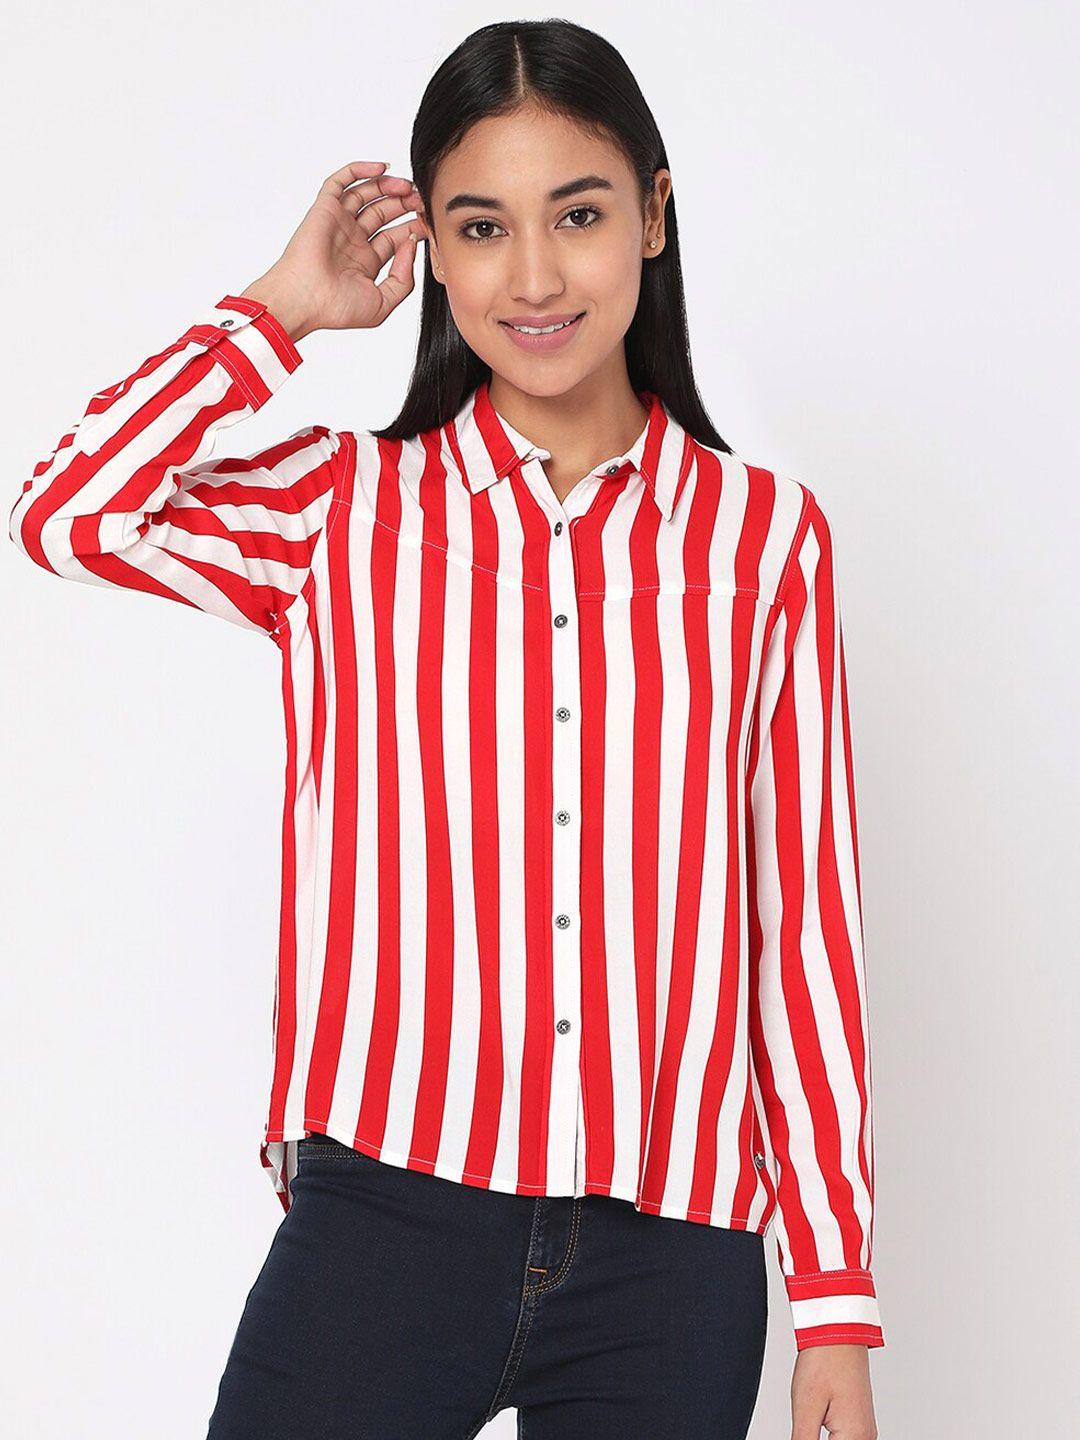 spykar red & white striped shirt style top